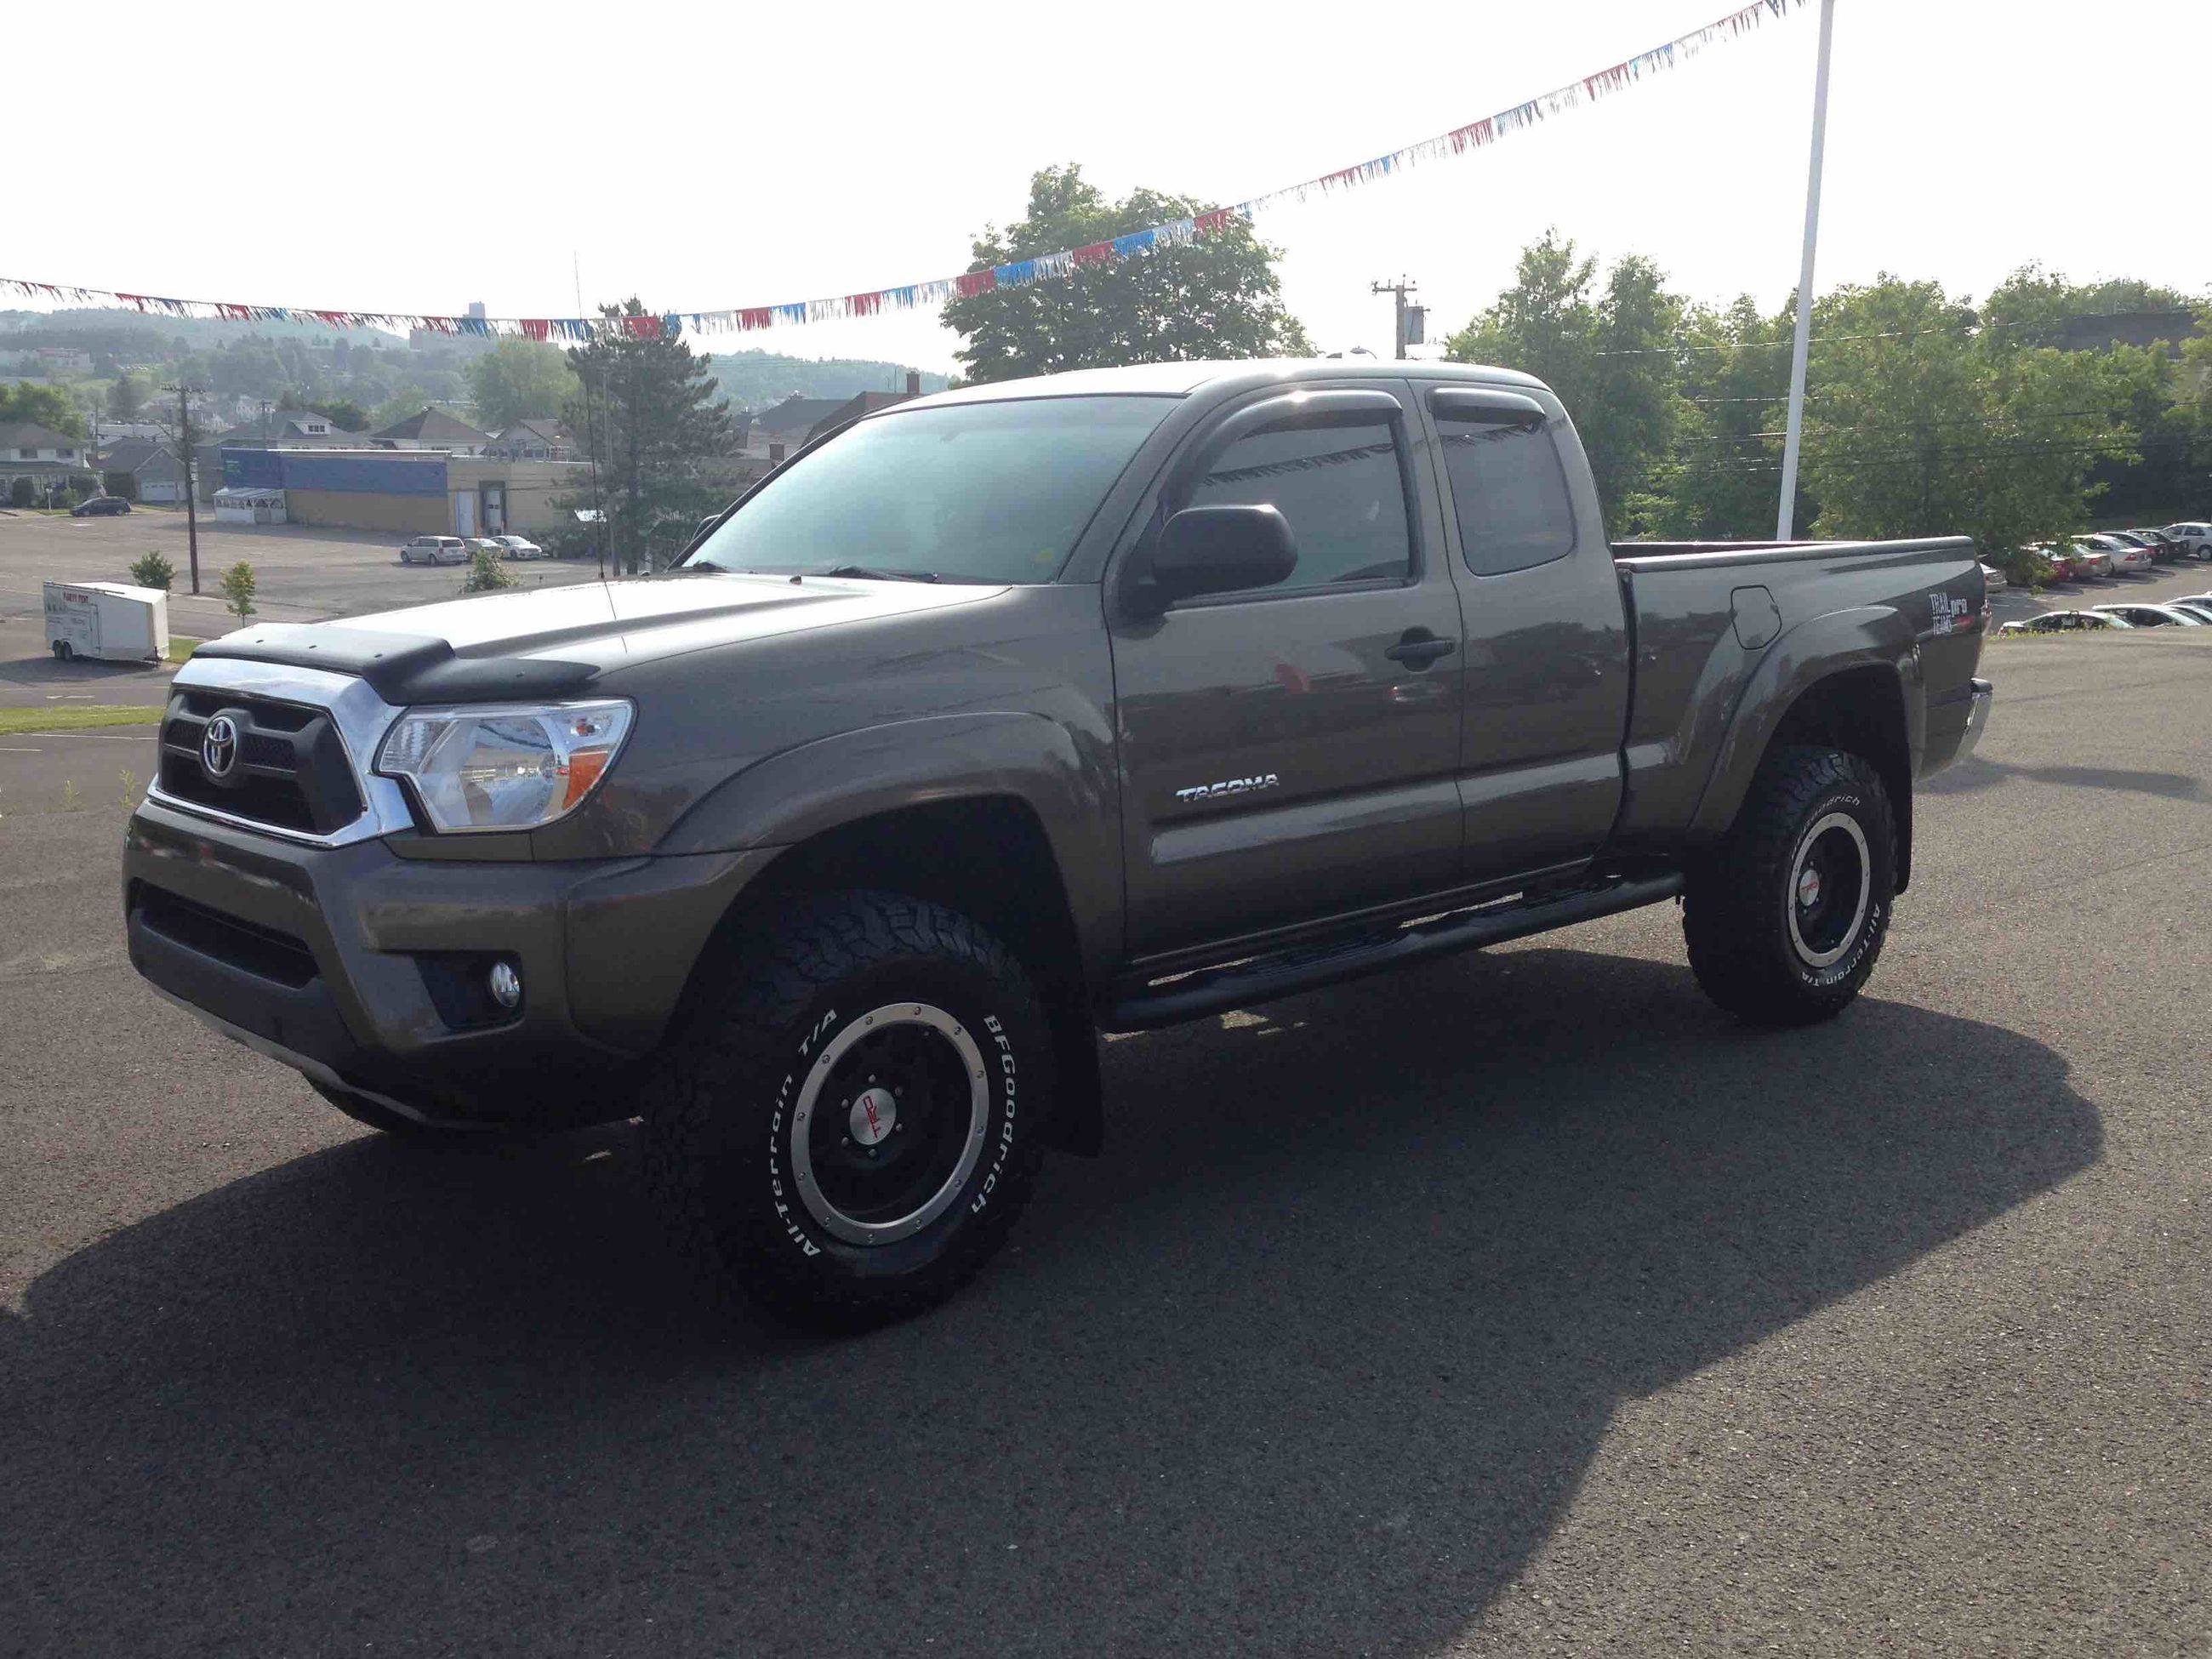 Used 2012 Toyota Tacoma Trd Trail Team Pro In Edmundston Used